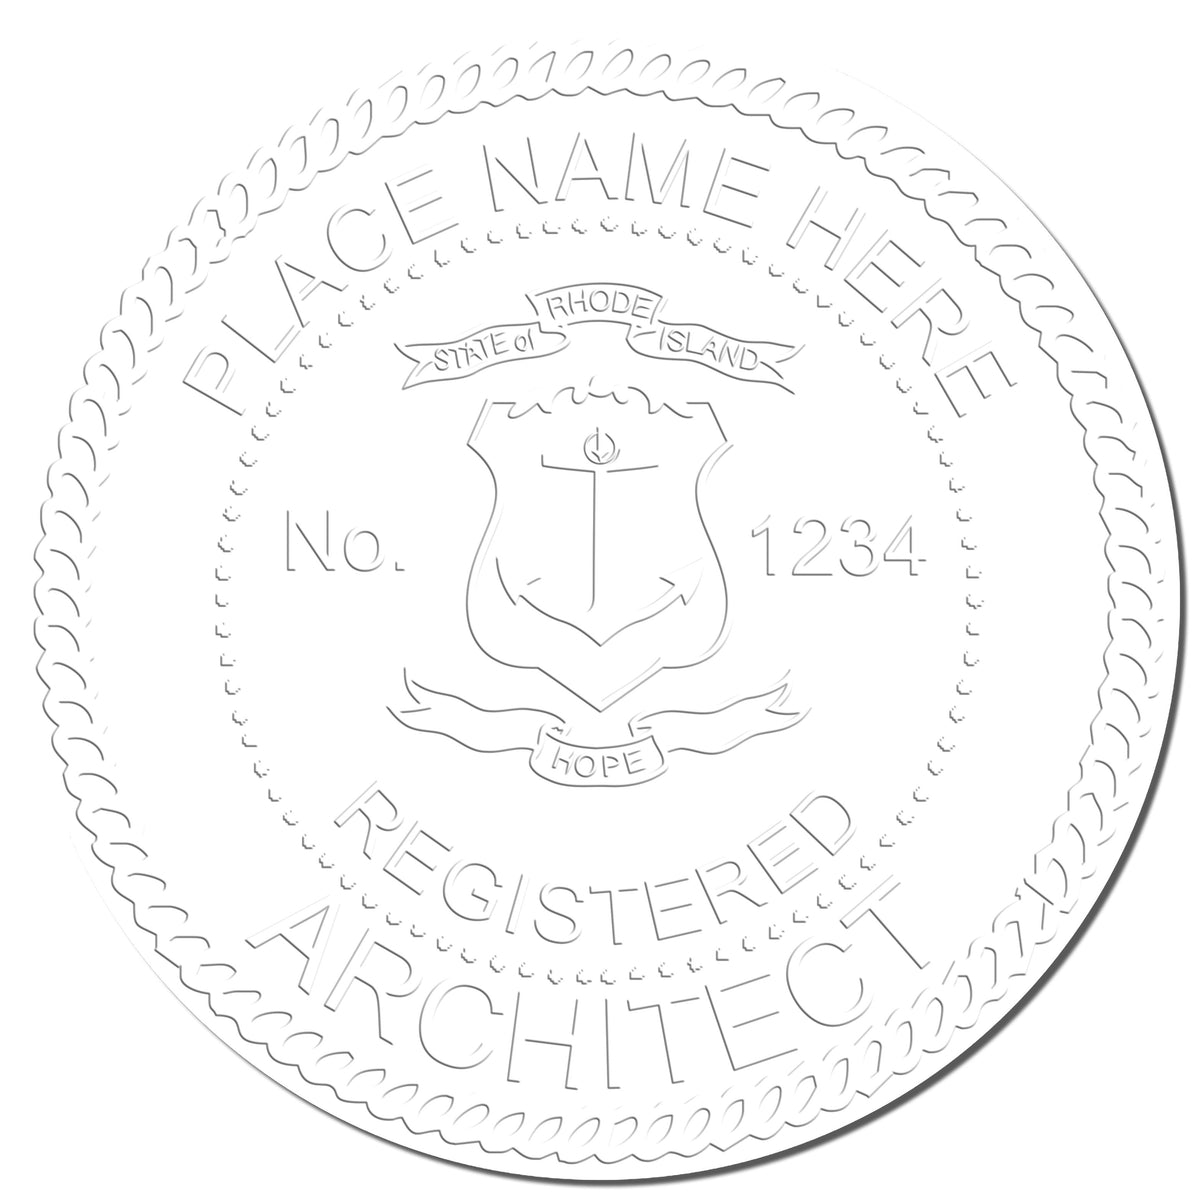 This paper is stamped with a sample imprint of the Hybrid Rhode Island Architect Seal, signifying its quality and reliability.